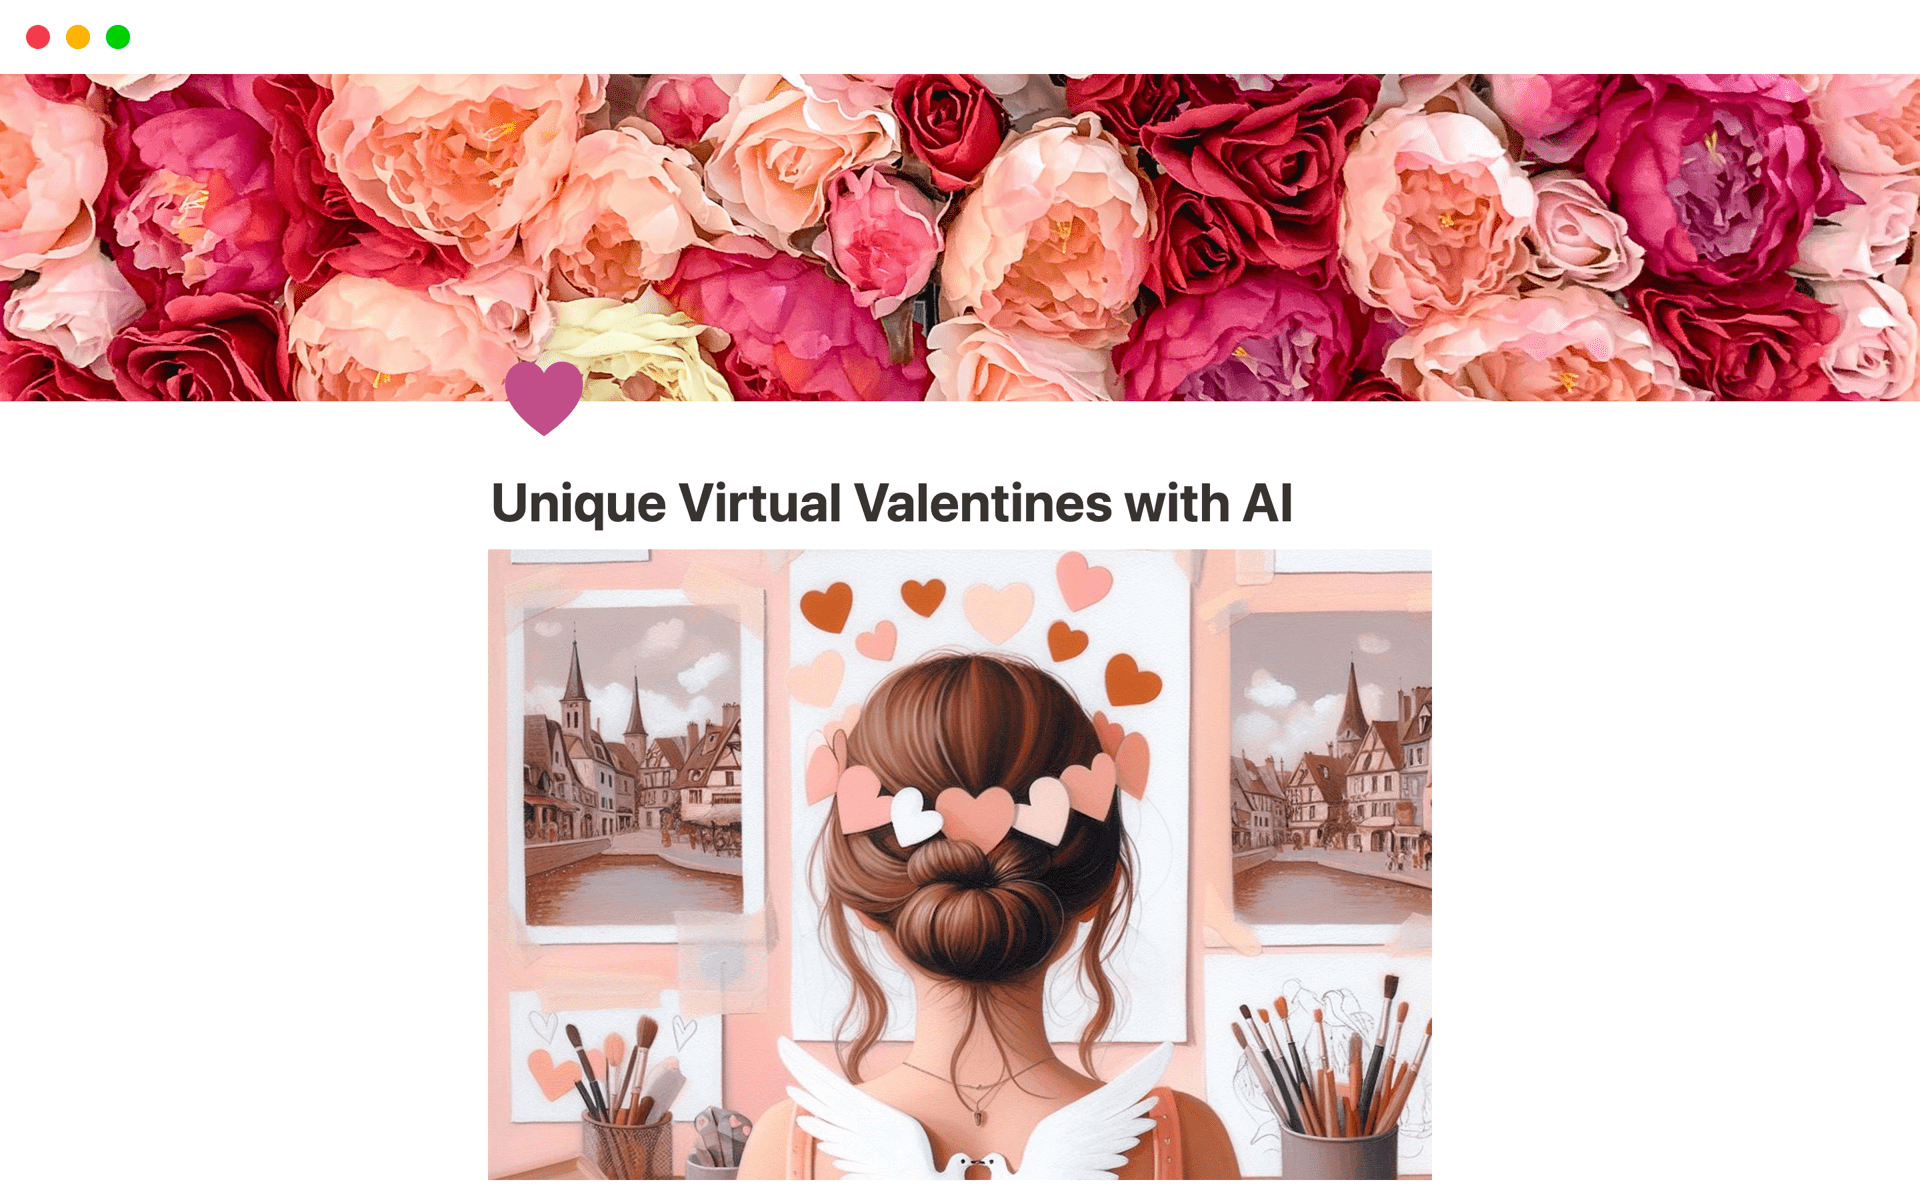 A template for creating easy and unique virtual valentines to send to your friends and loved ones.